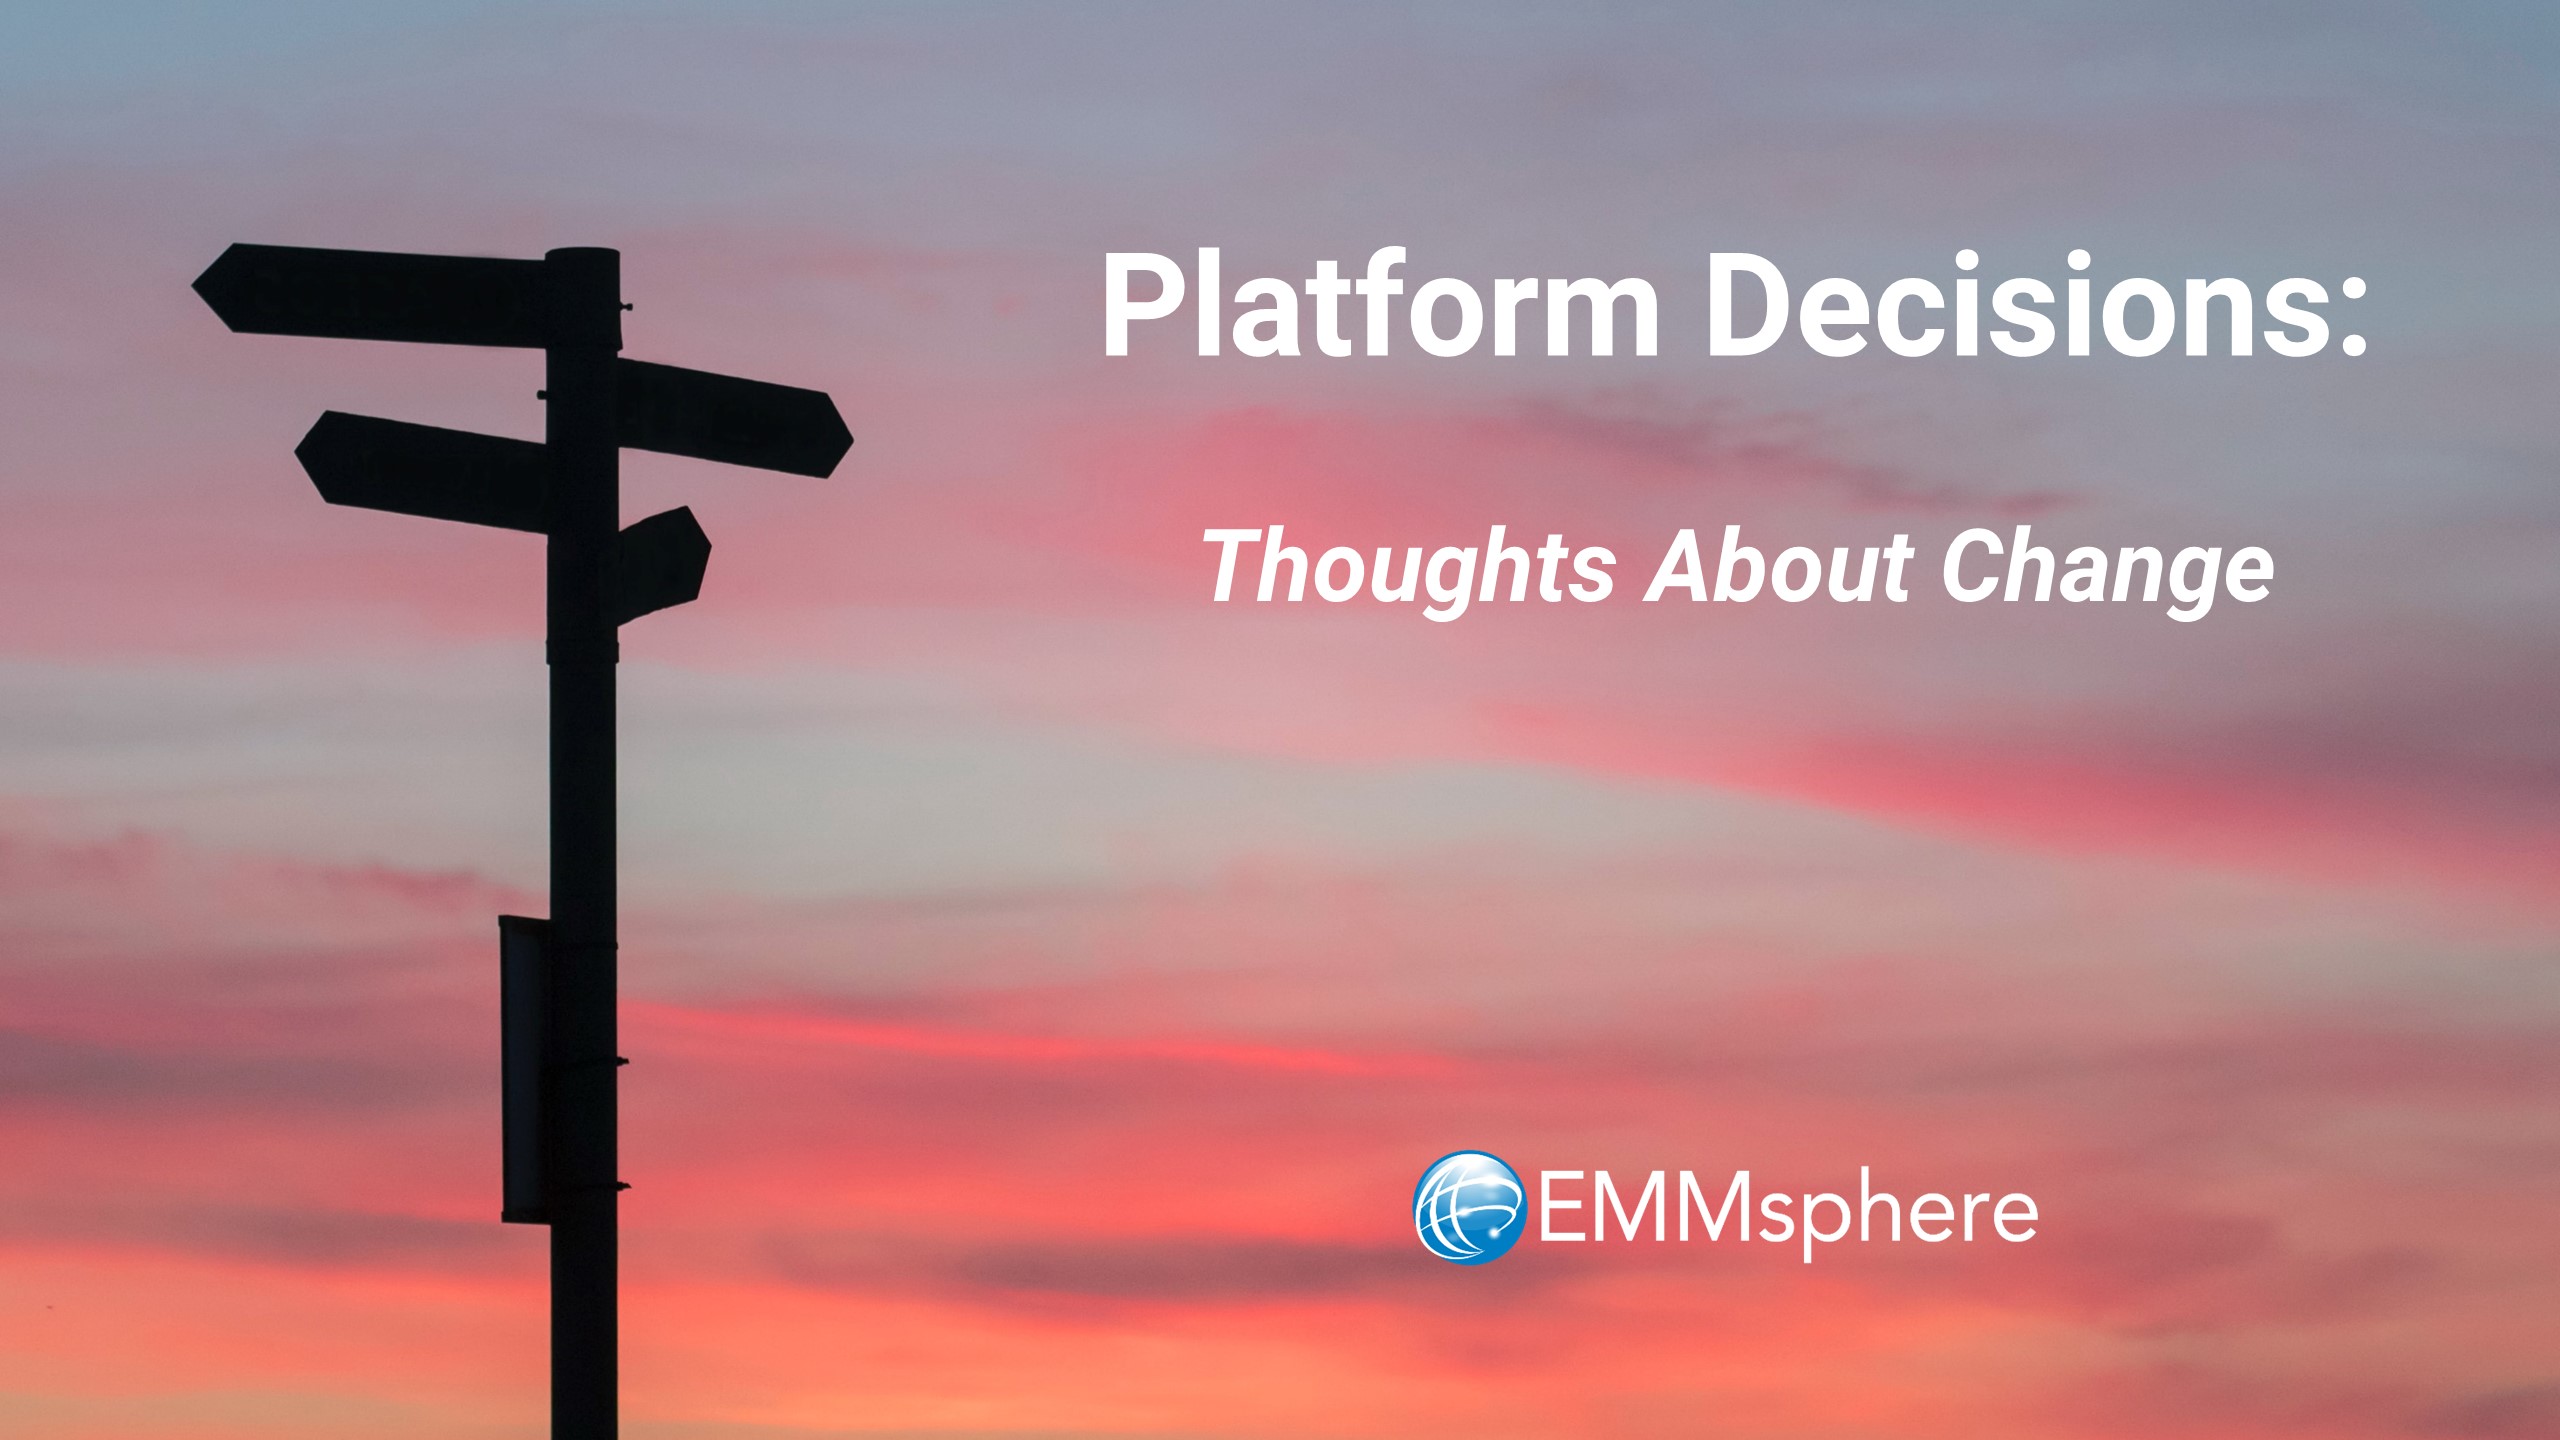 Platform Decisions - Thoughts About Change